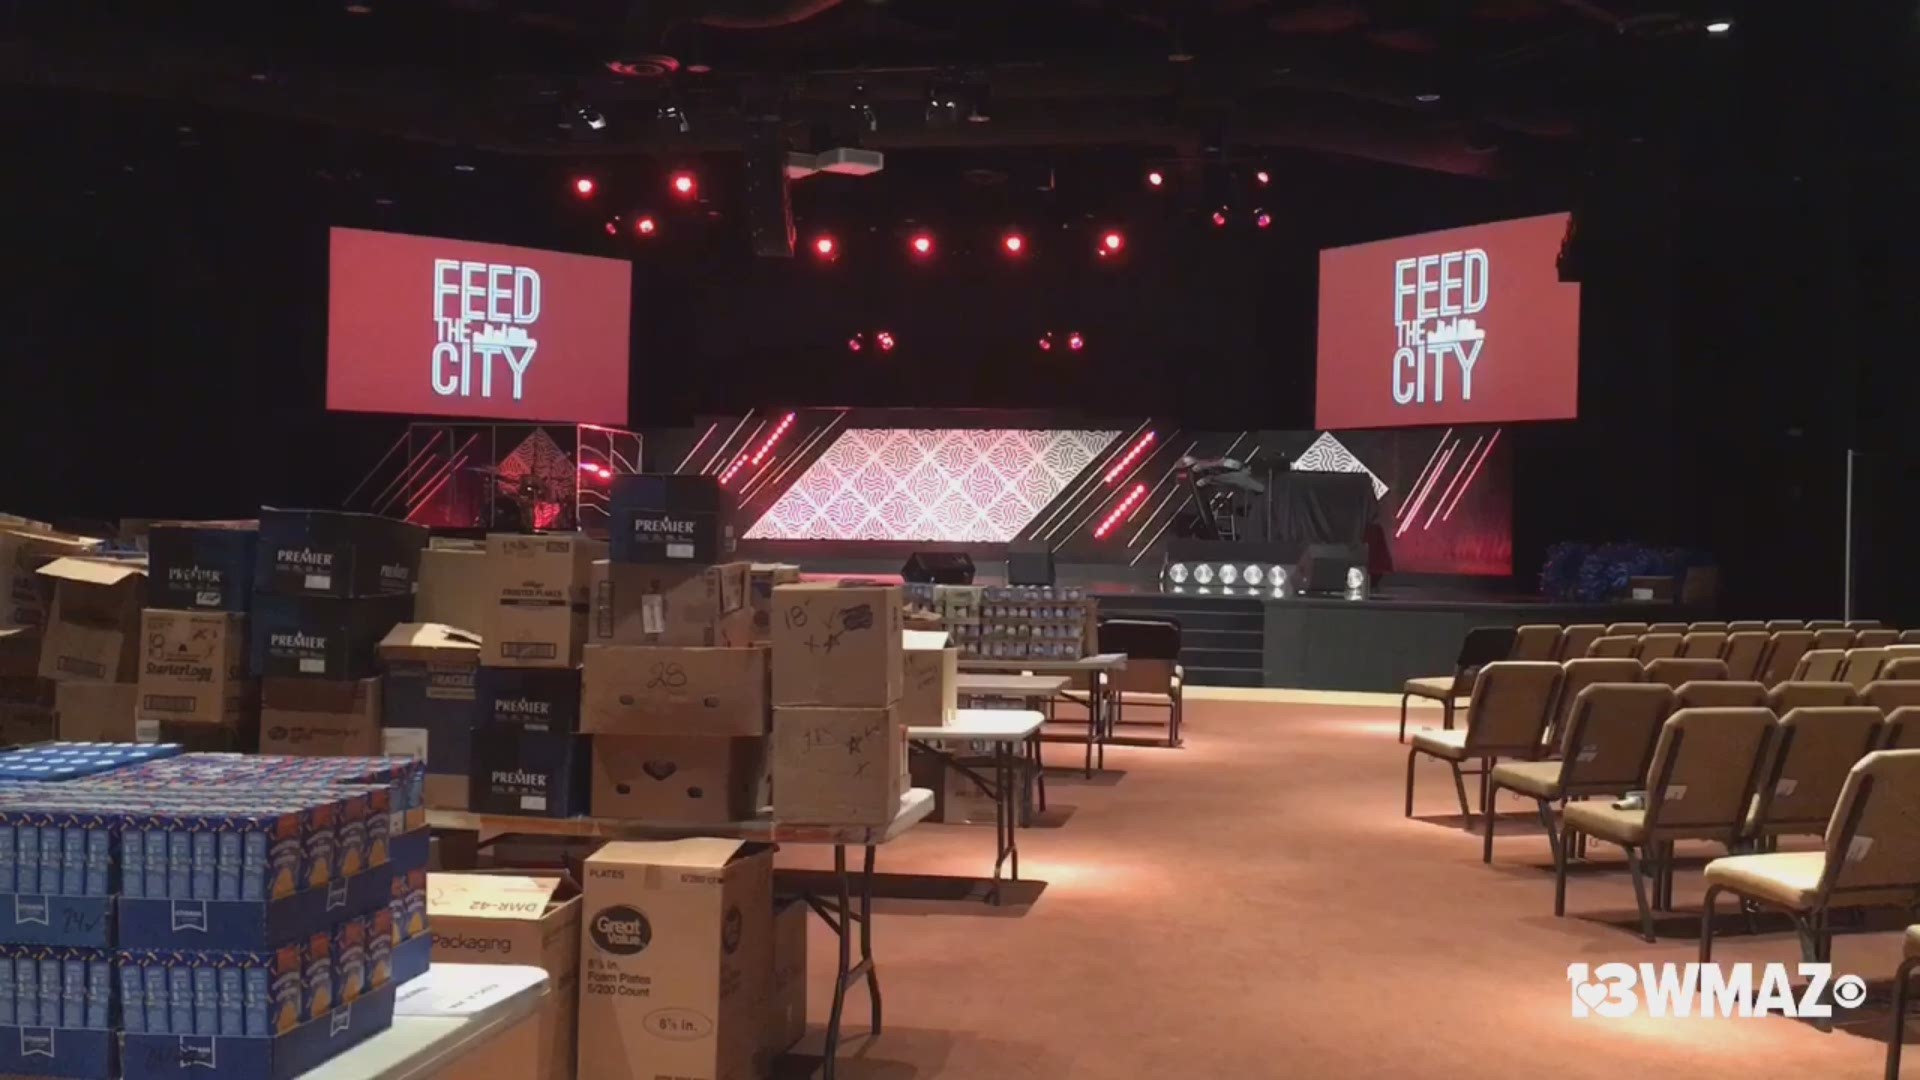 Hope Church in Fort Valley has spent the last few months collecting donations and prepping for its annual Feed the City event.